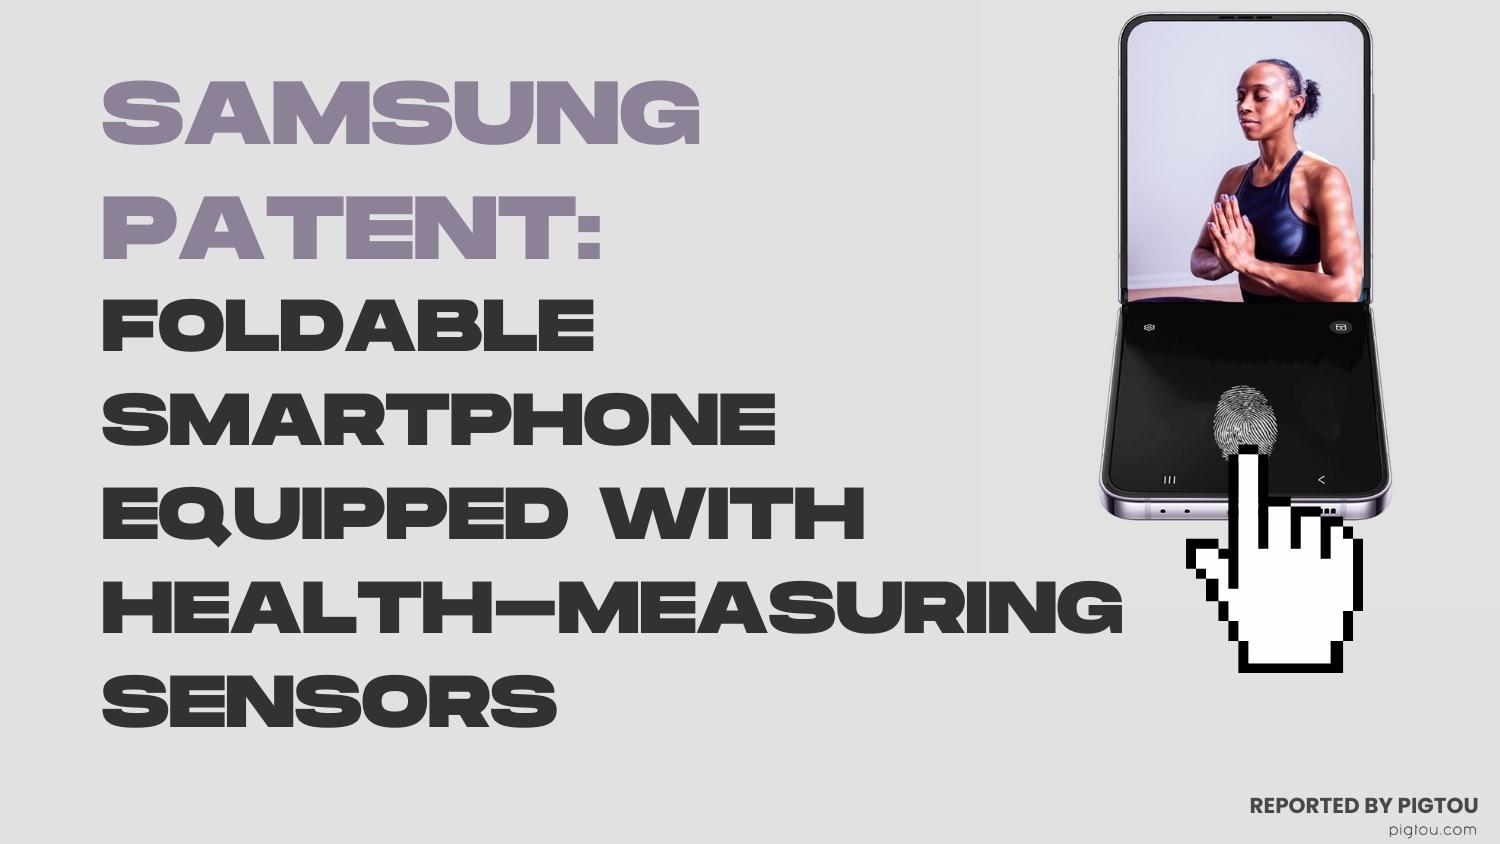 Samsung Patent Foldable Smartphone Equipped with Health-Measuring Sensors